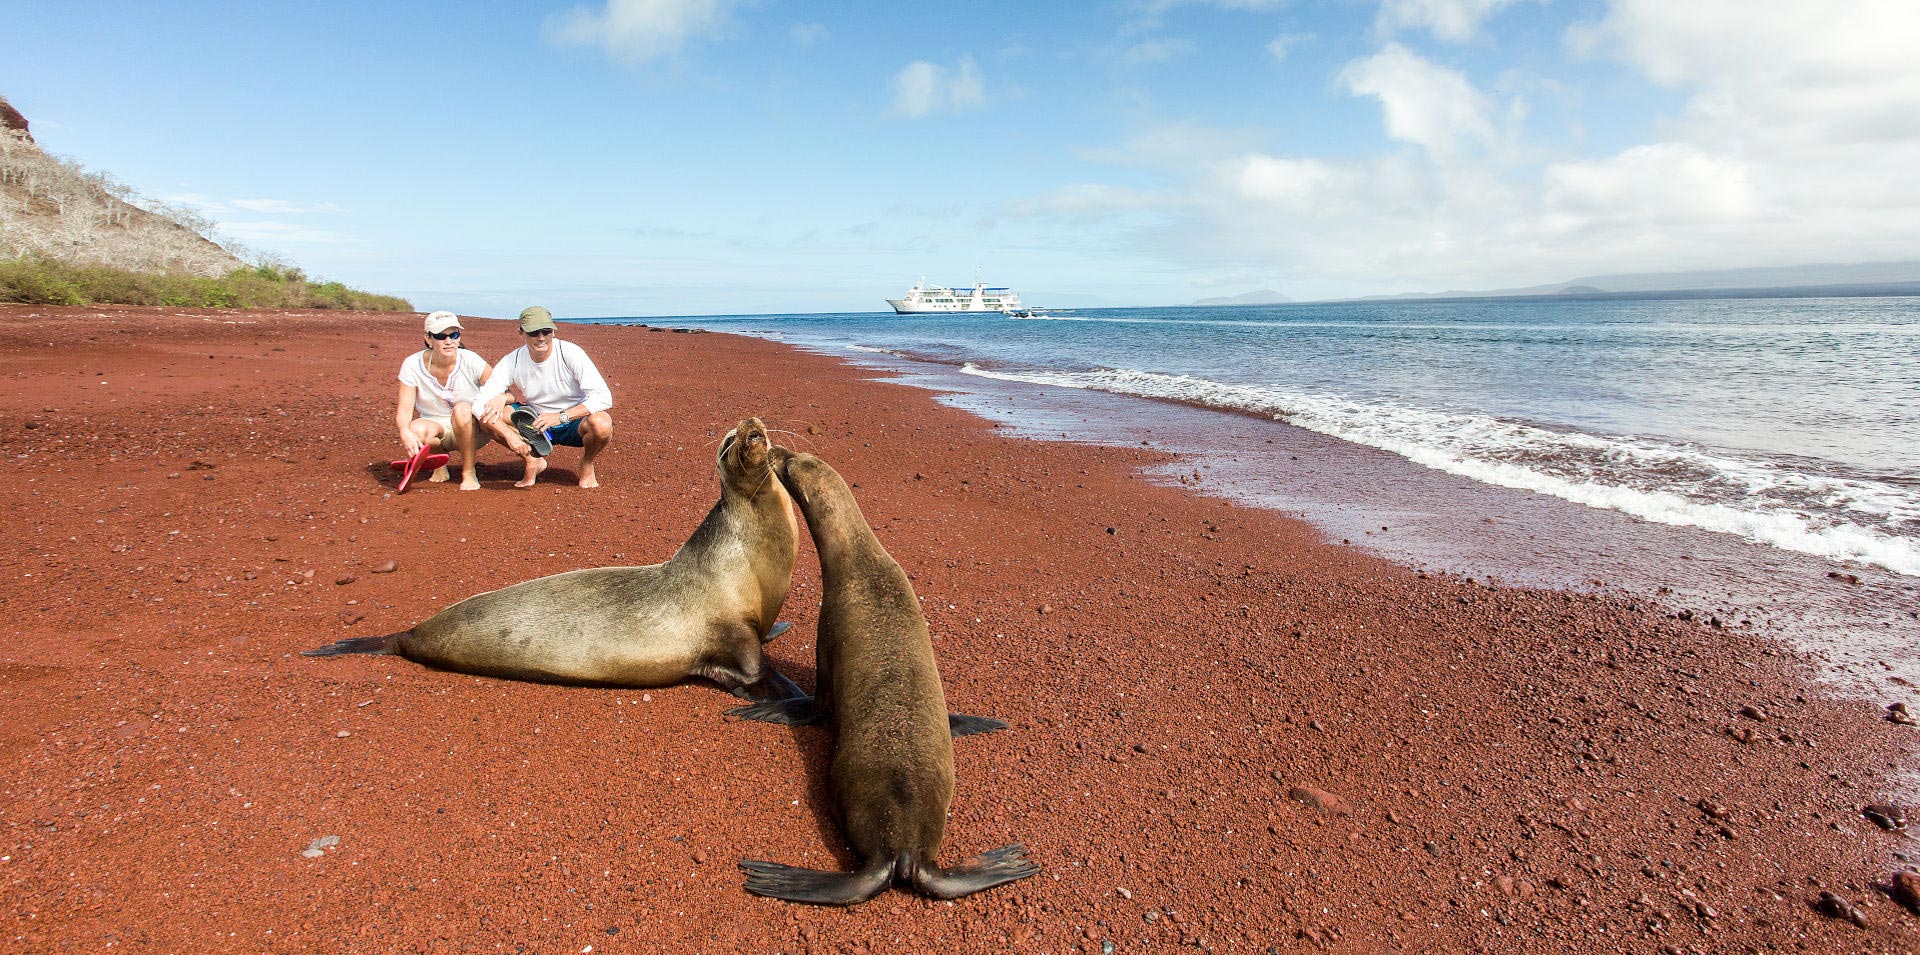 Tourists enjoying the view of Galapagos sea lions